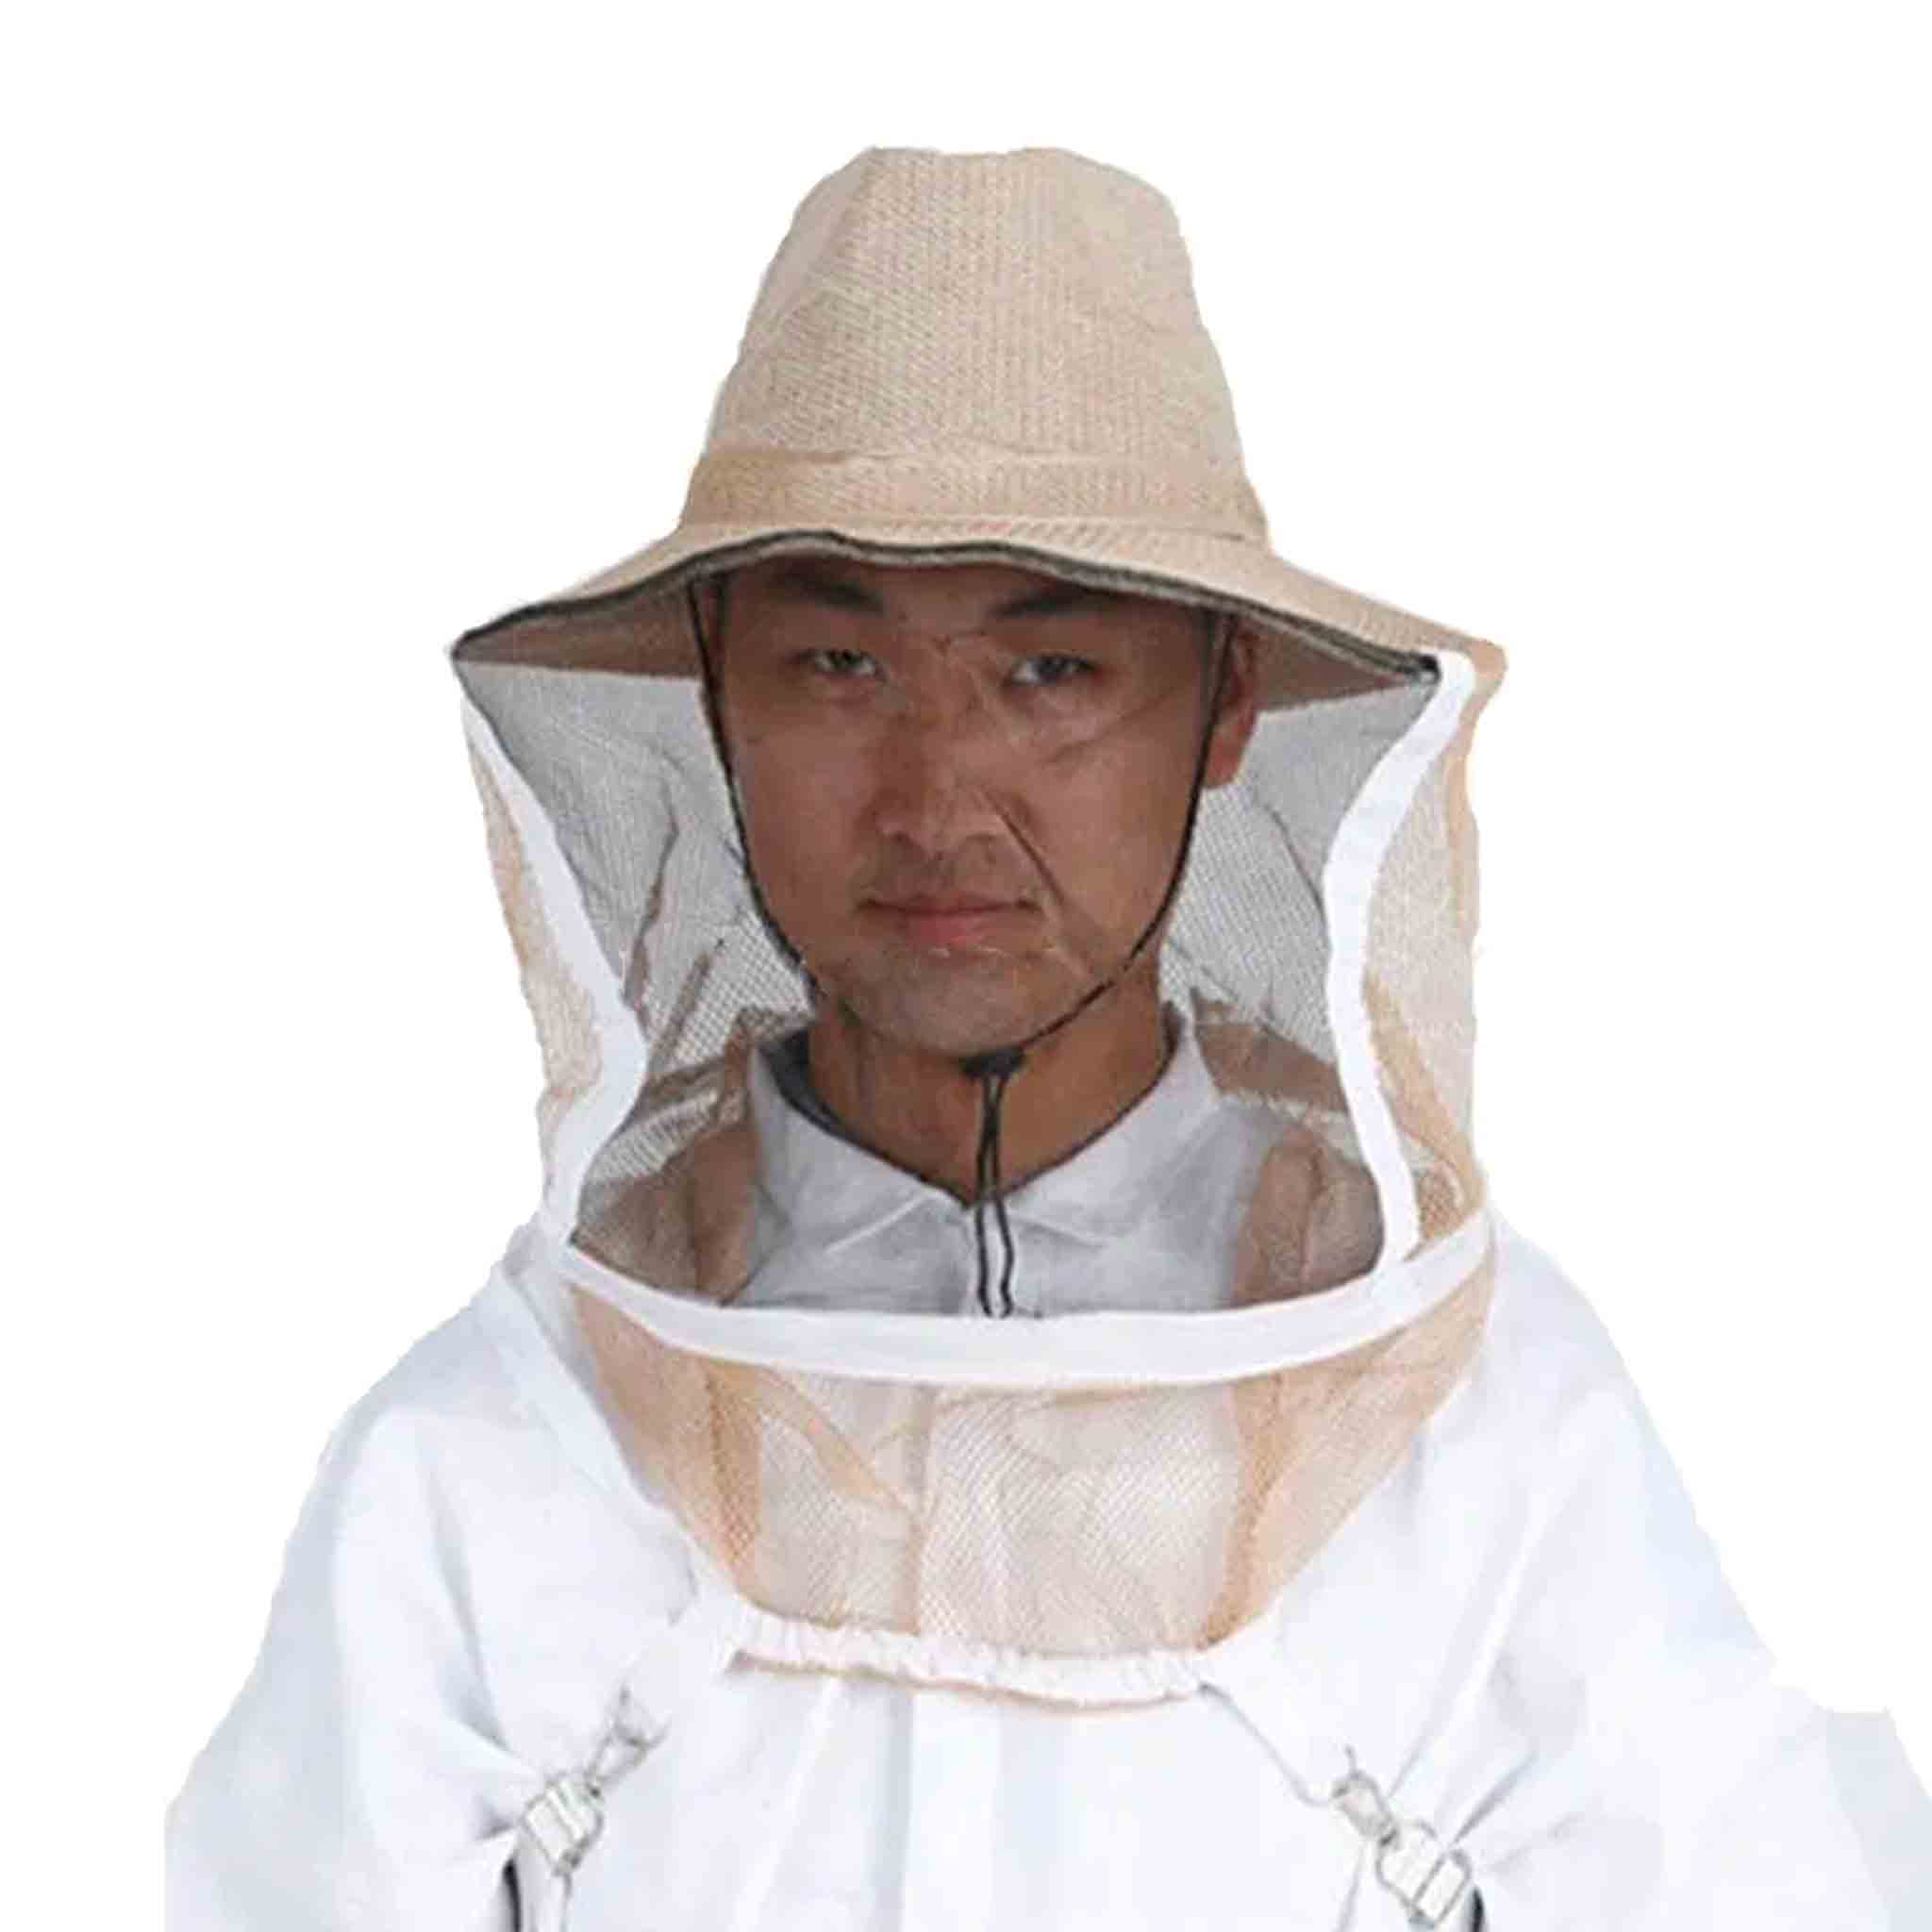 Beekeeping Round Hat and Veil with Strap under the Chin - Clothing collection by Buzzbee Beekeeping Supplies